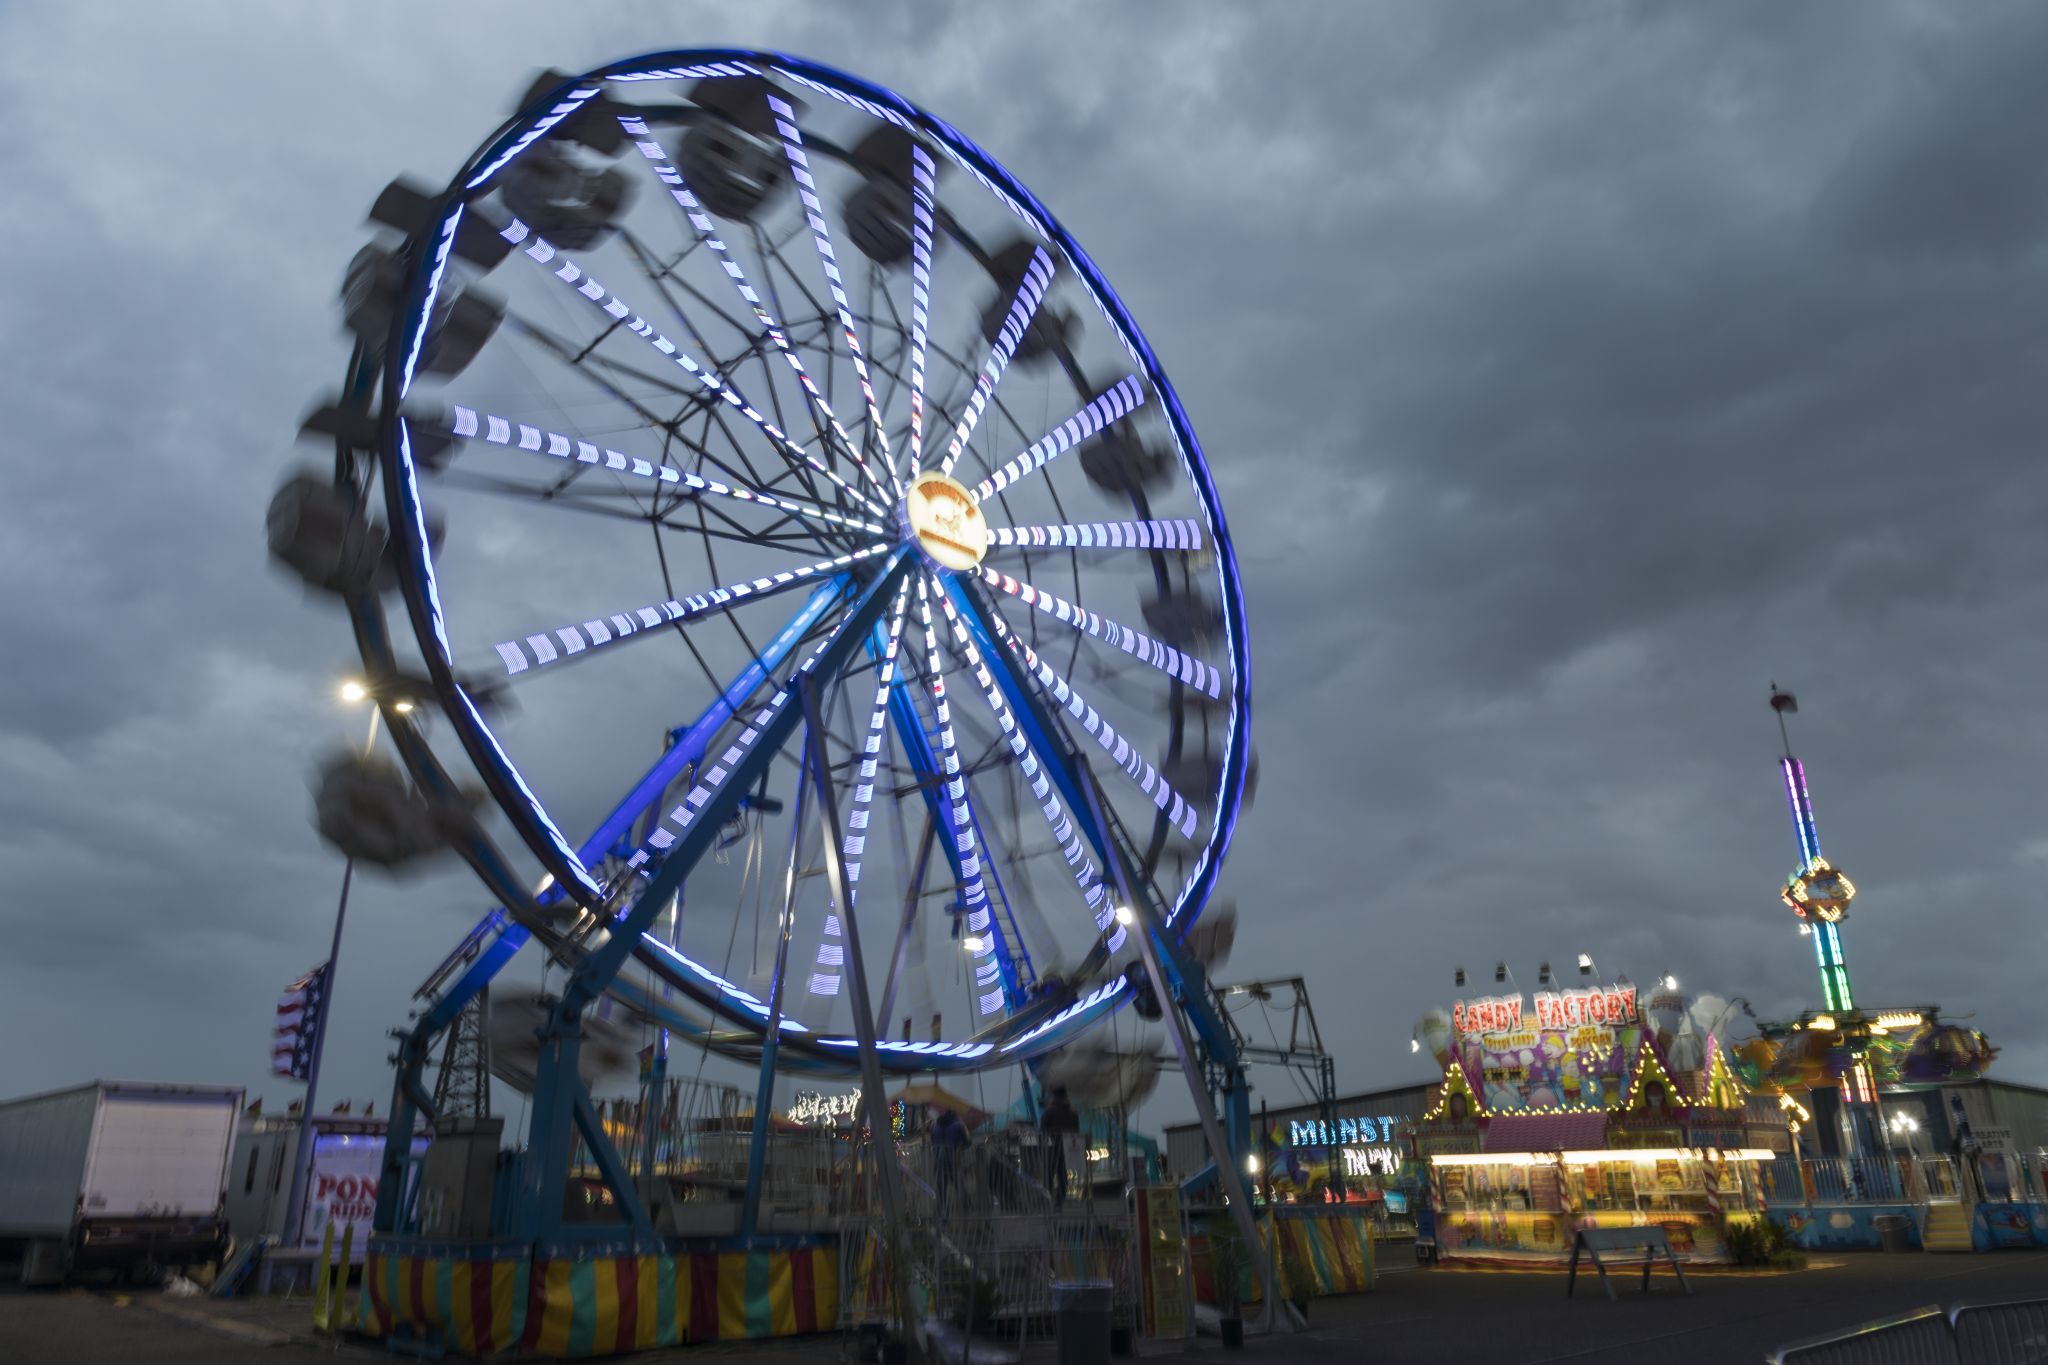 Scenes from the Permian Basin Fair and Expo